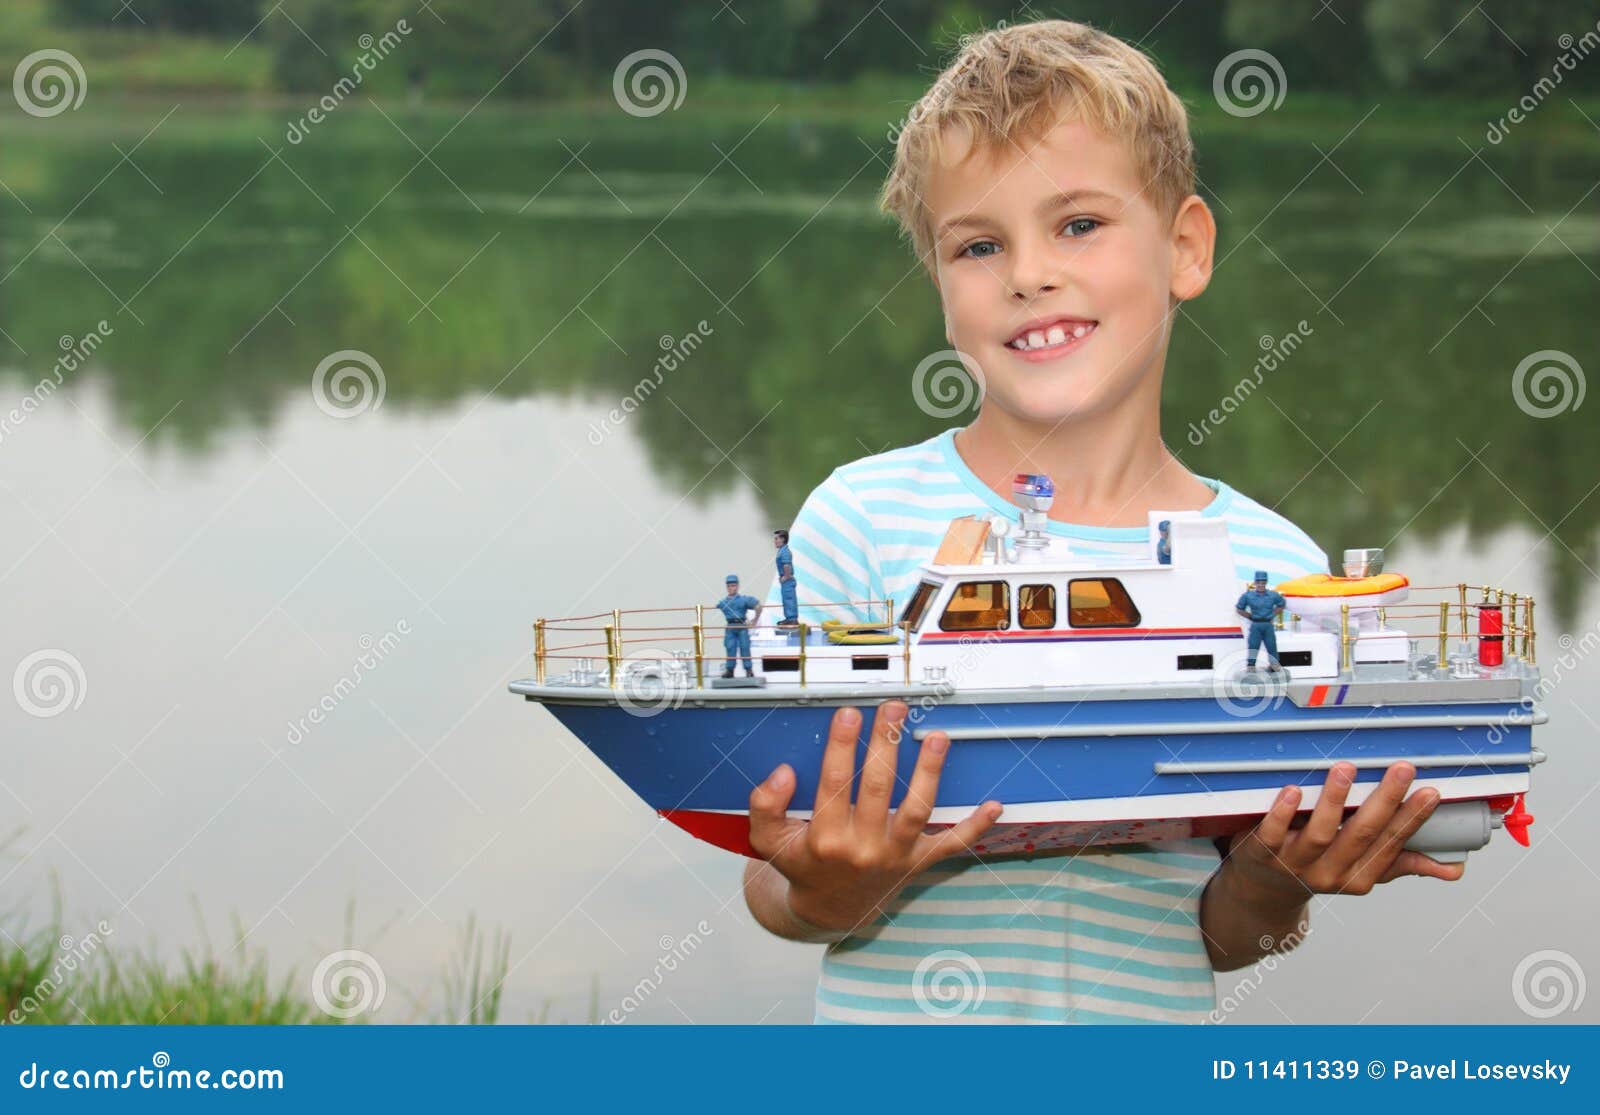 boy with toy ship in hands ashore